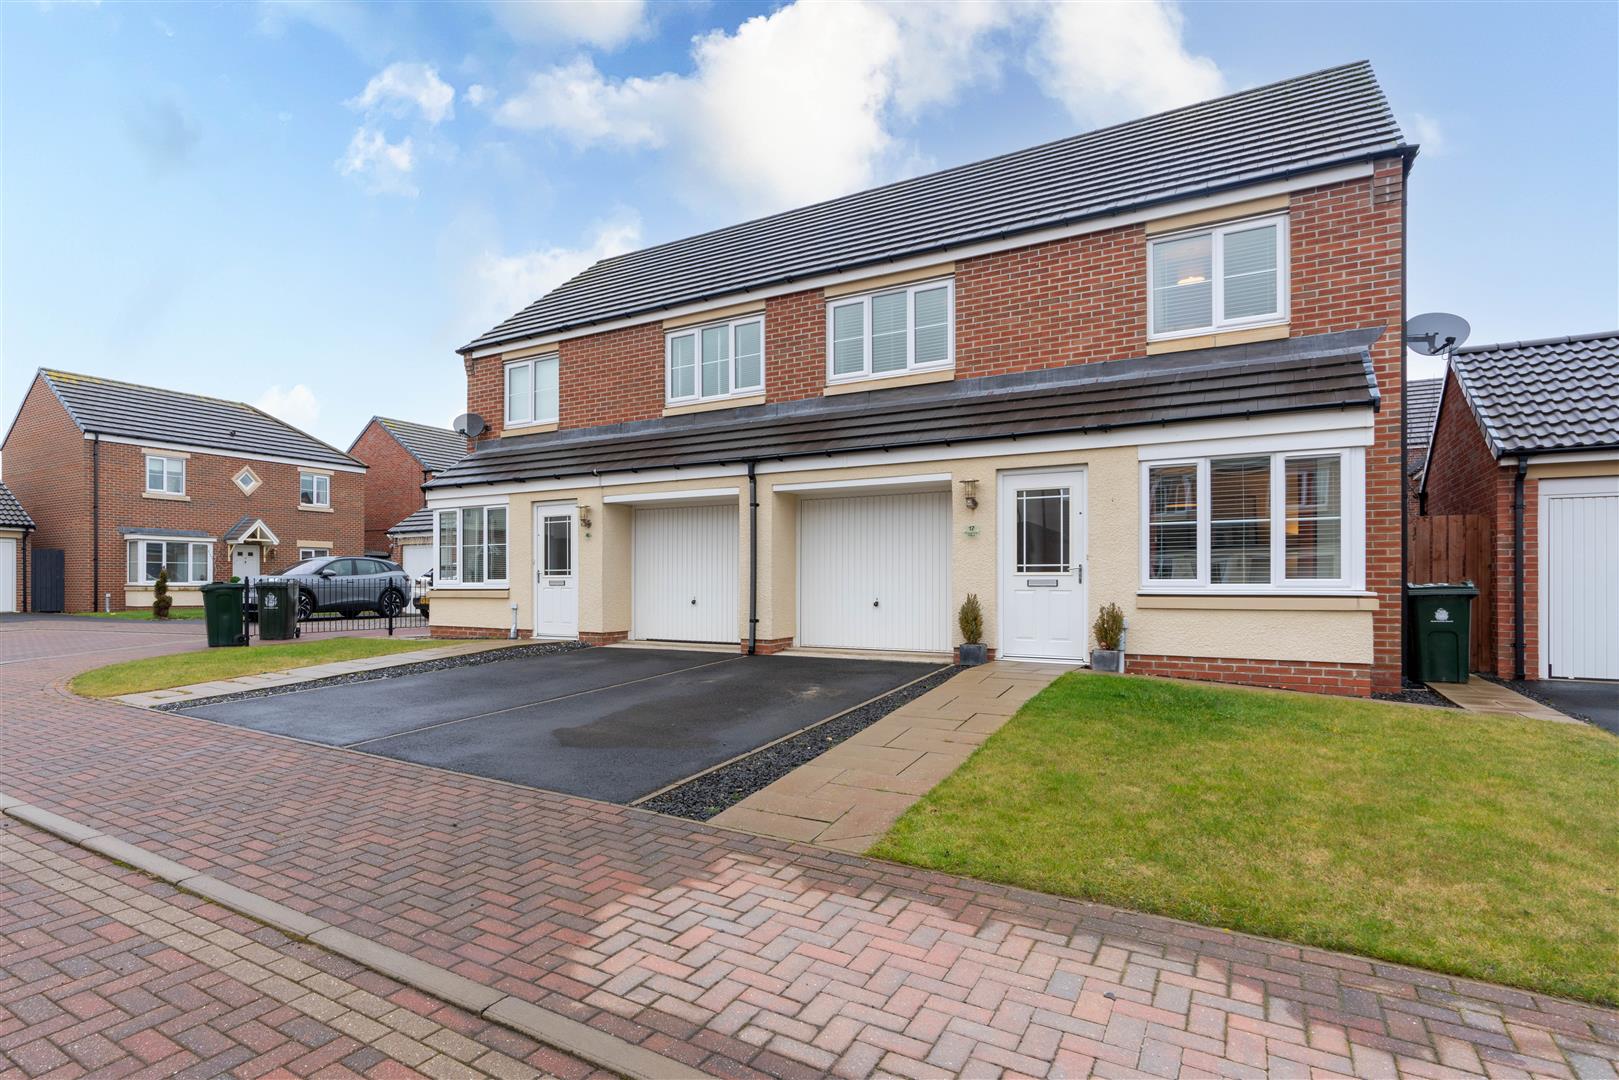 3 bed semi-detached house for sale in Foxglove Place, Wideopen  - Property Image 1